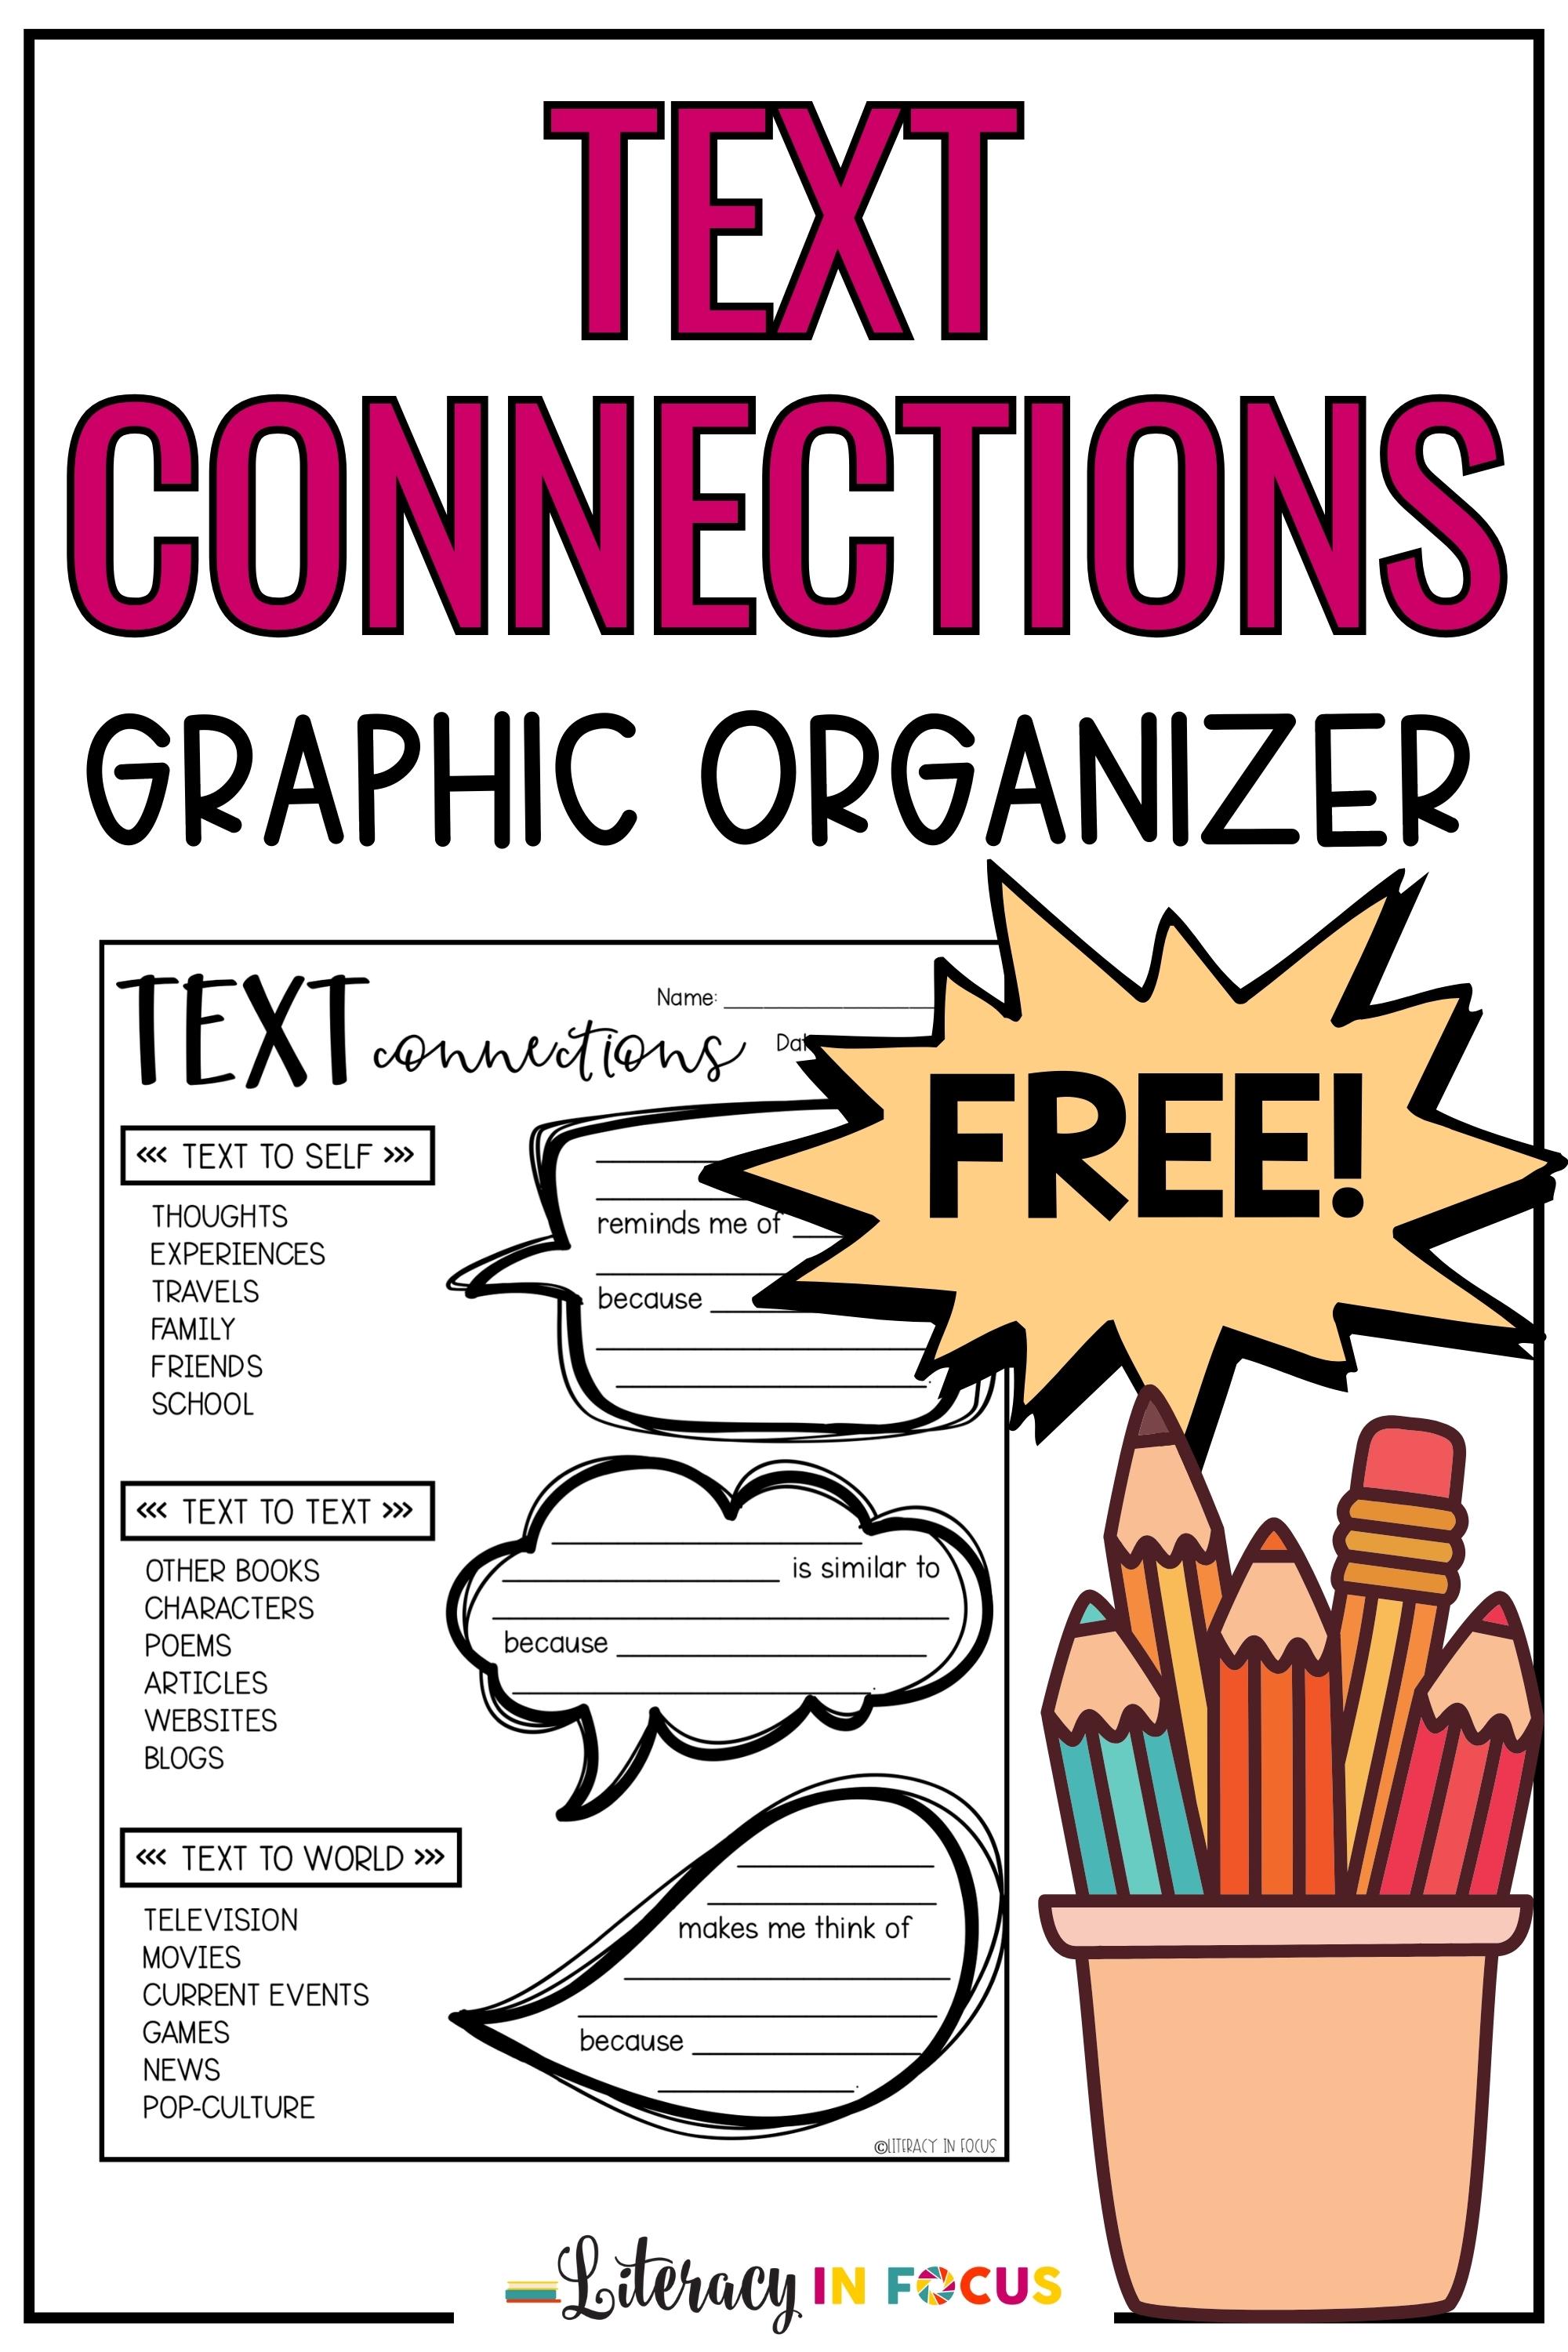 Text Connections Graphic Organizer PDF